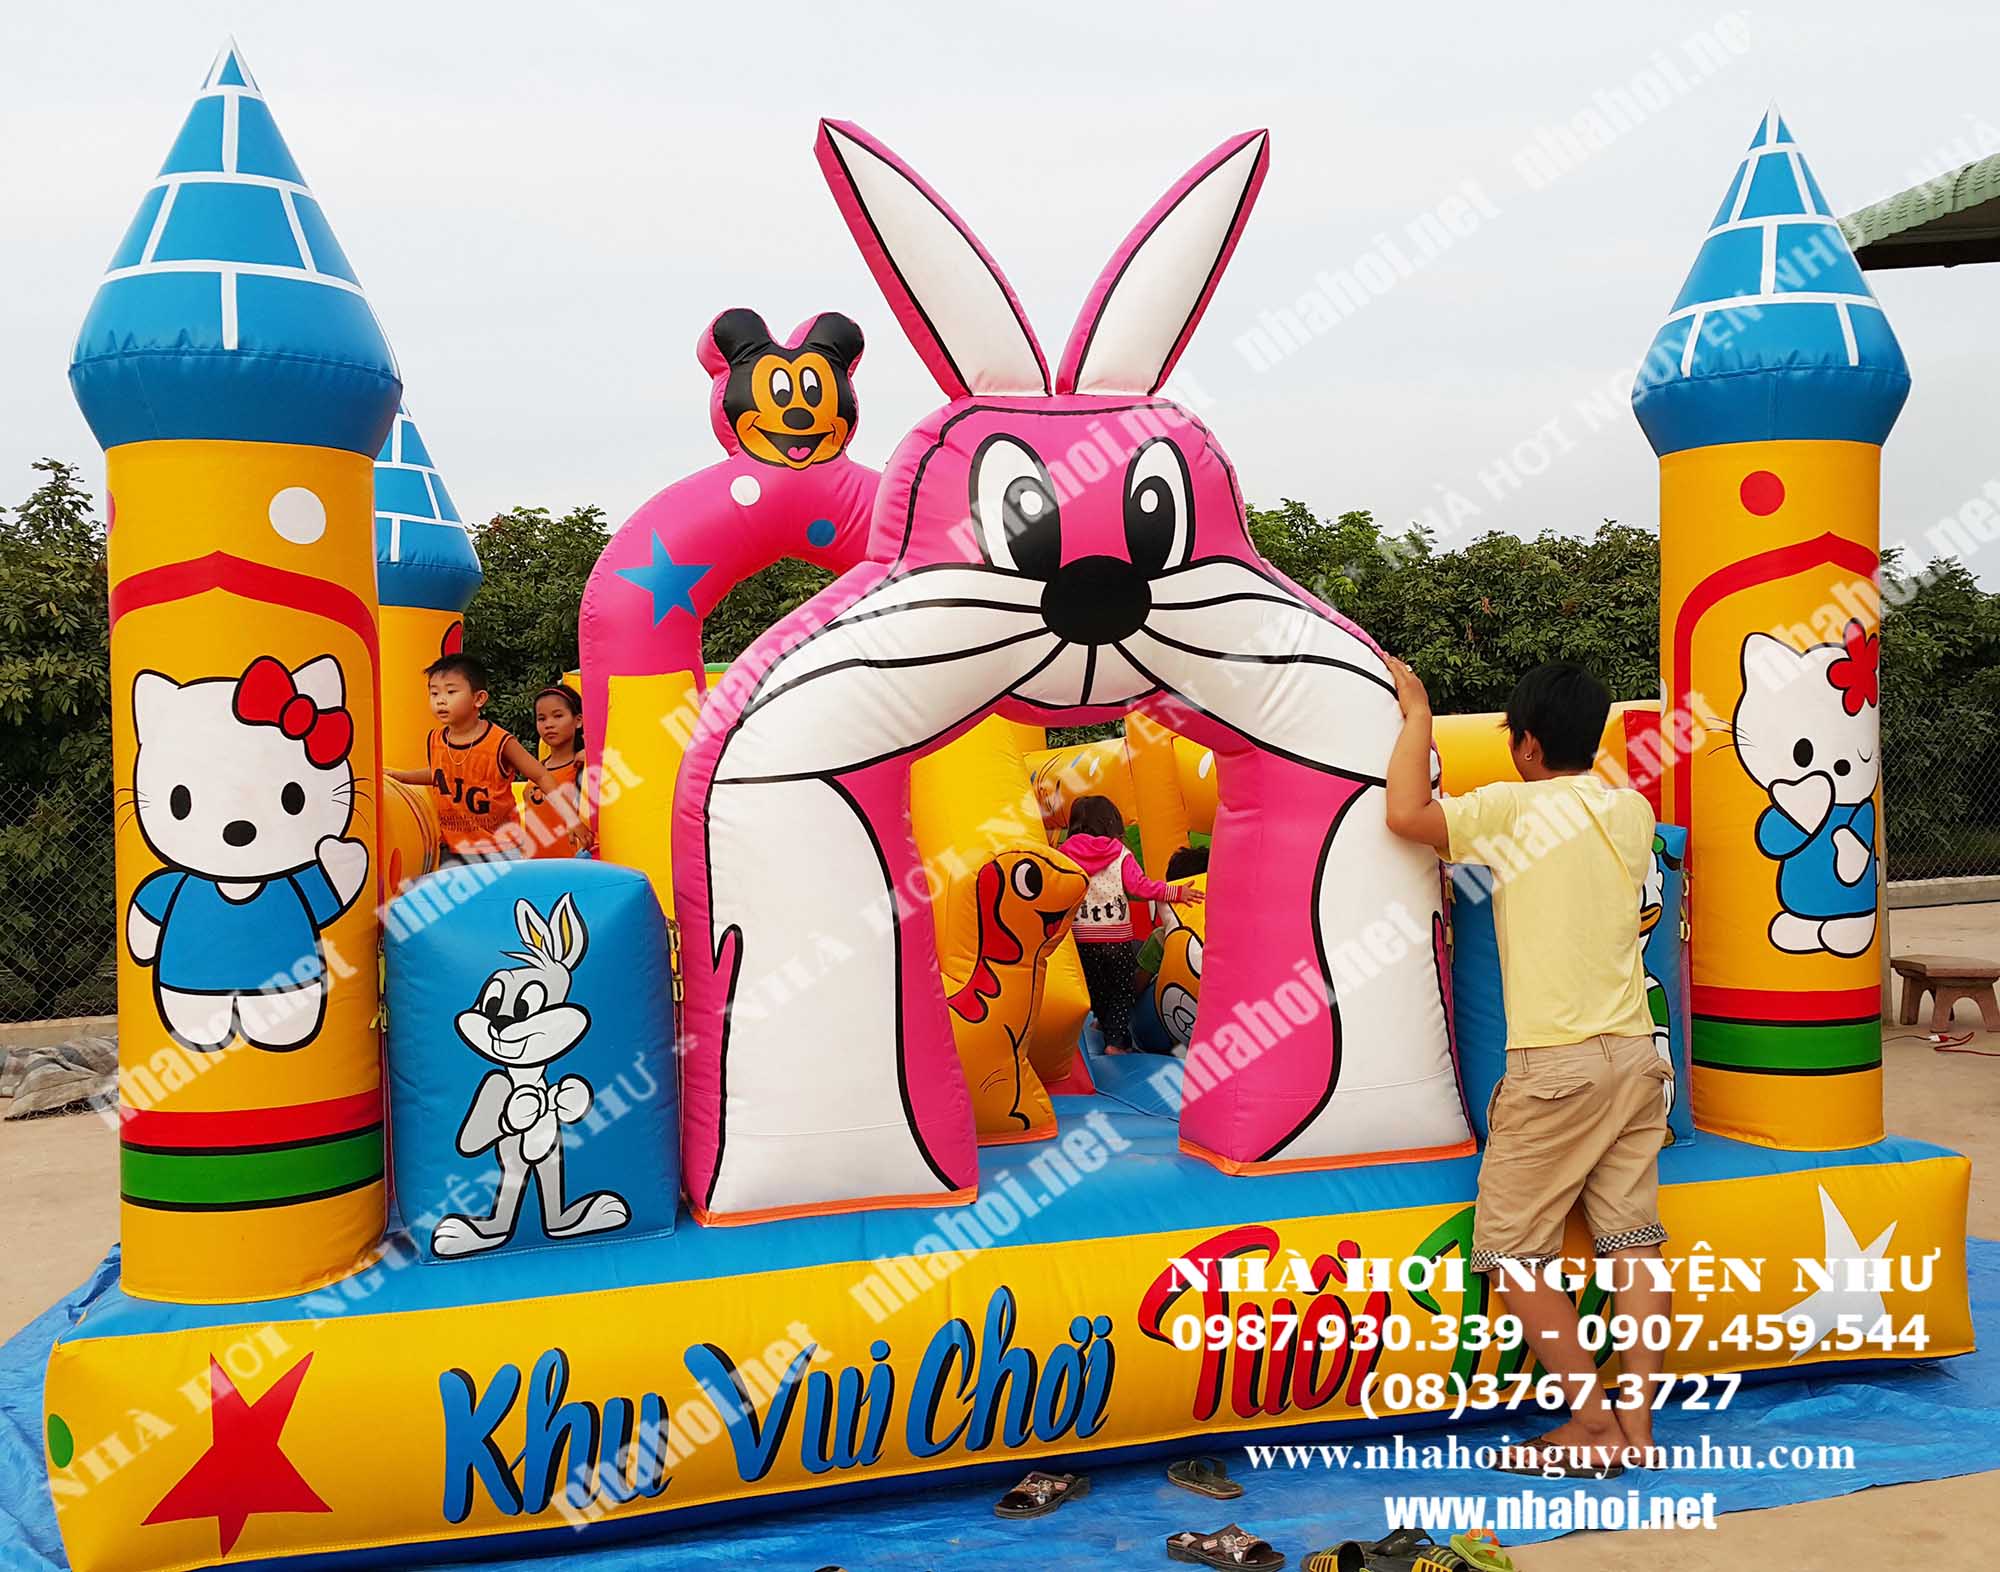 Bumble B. reccomend Bounce 4 fun inflatables las cruces